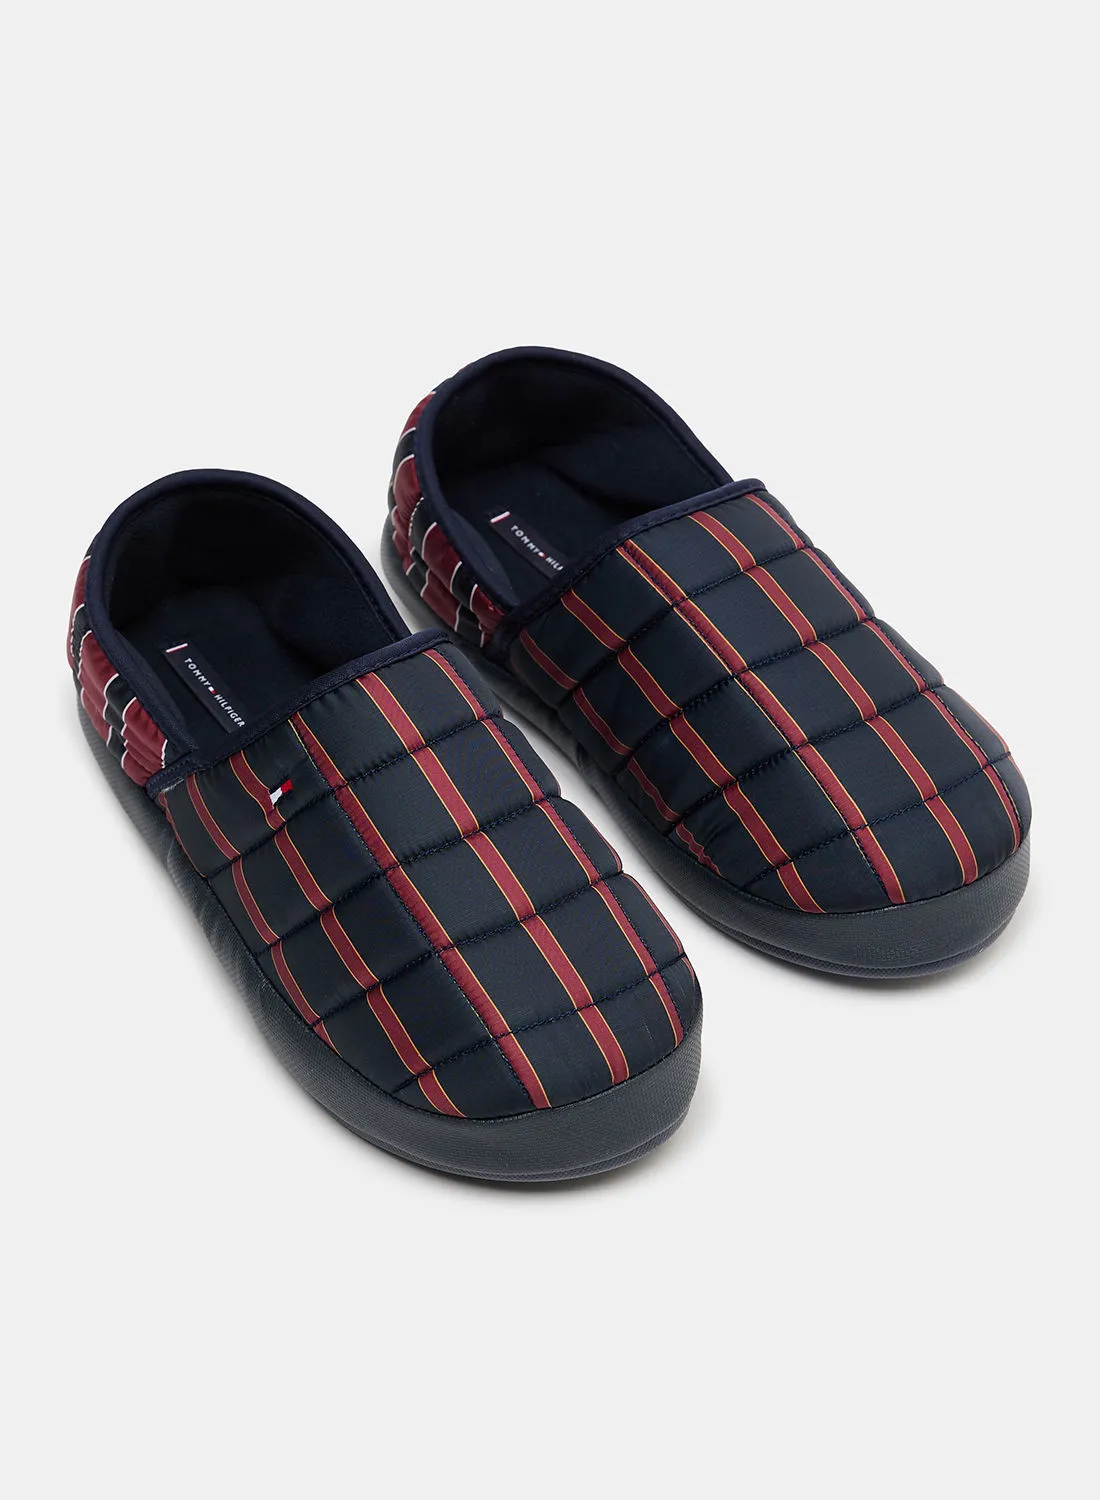 TOMMY HILFIGER Comfort Striped Home Slippers